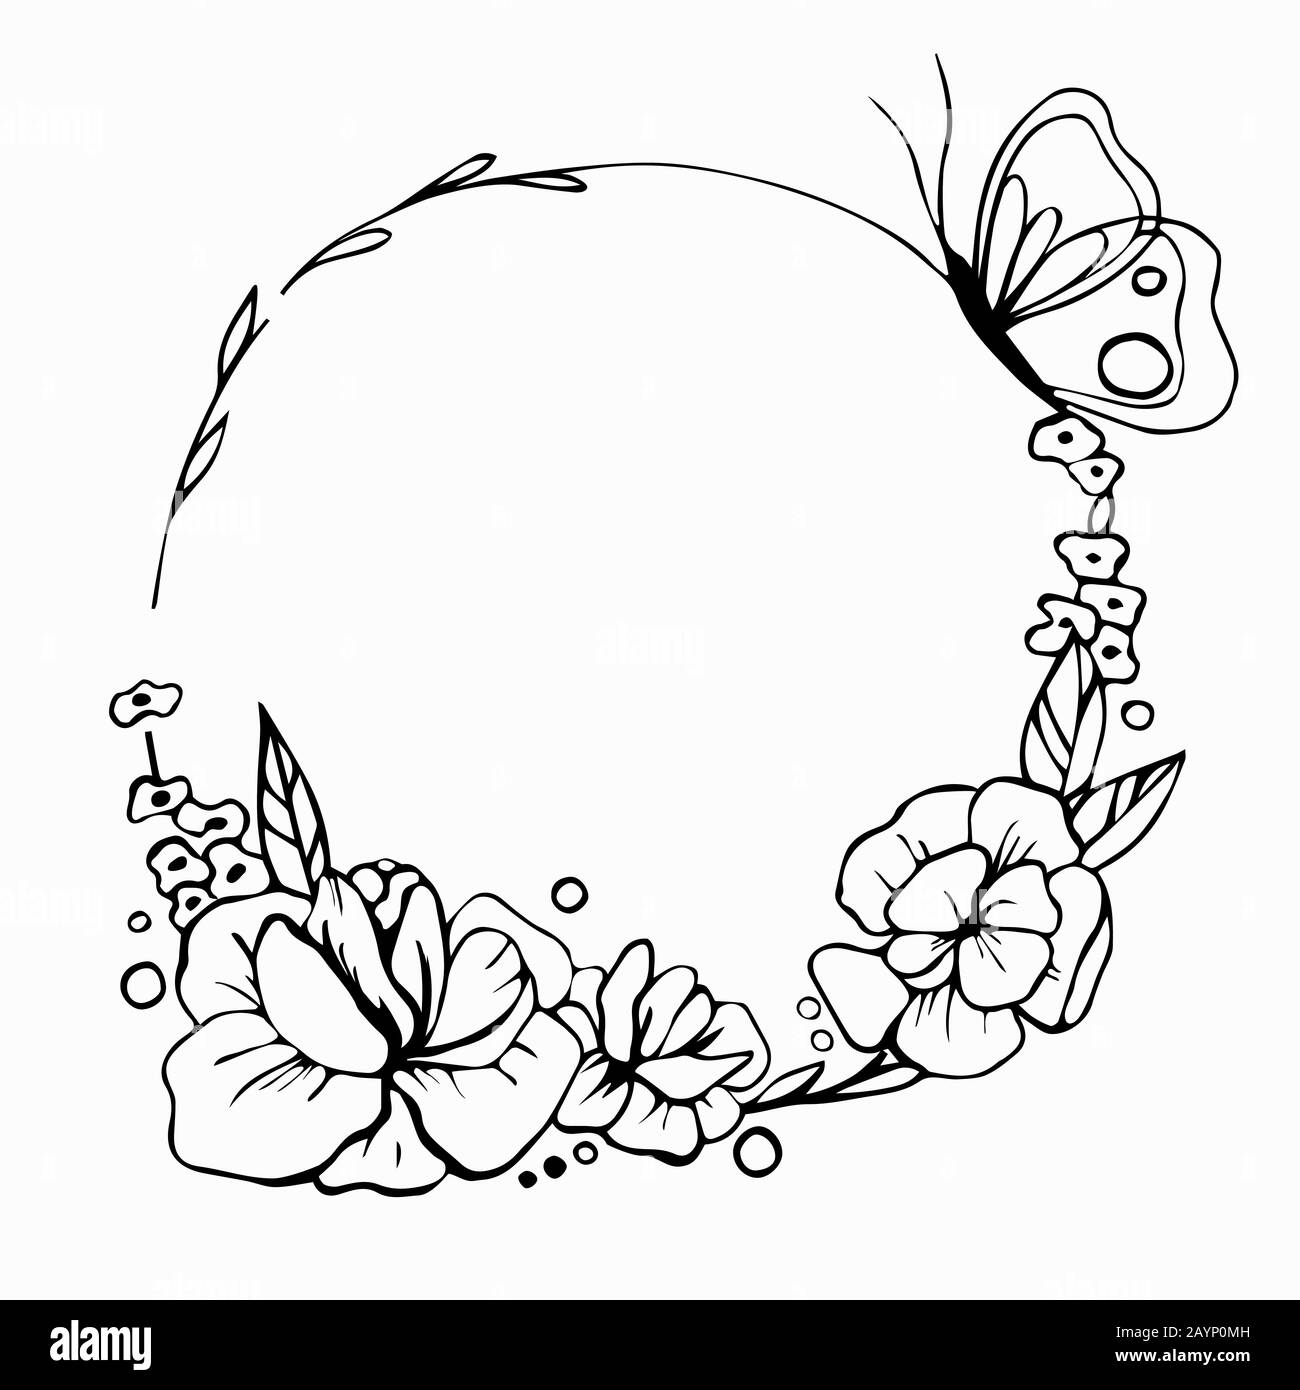 Black And White Floral Illustration Vector Flowers In Circle